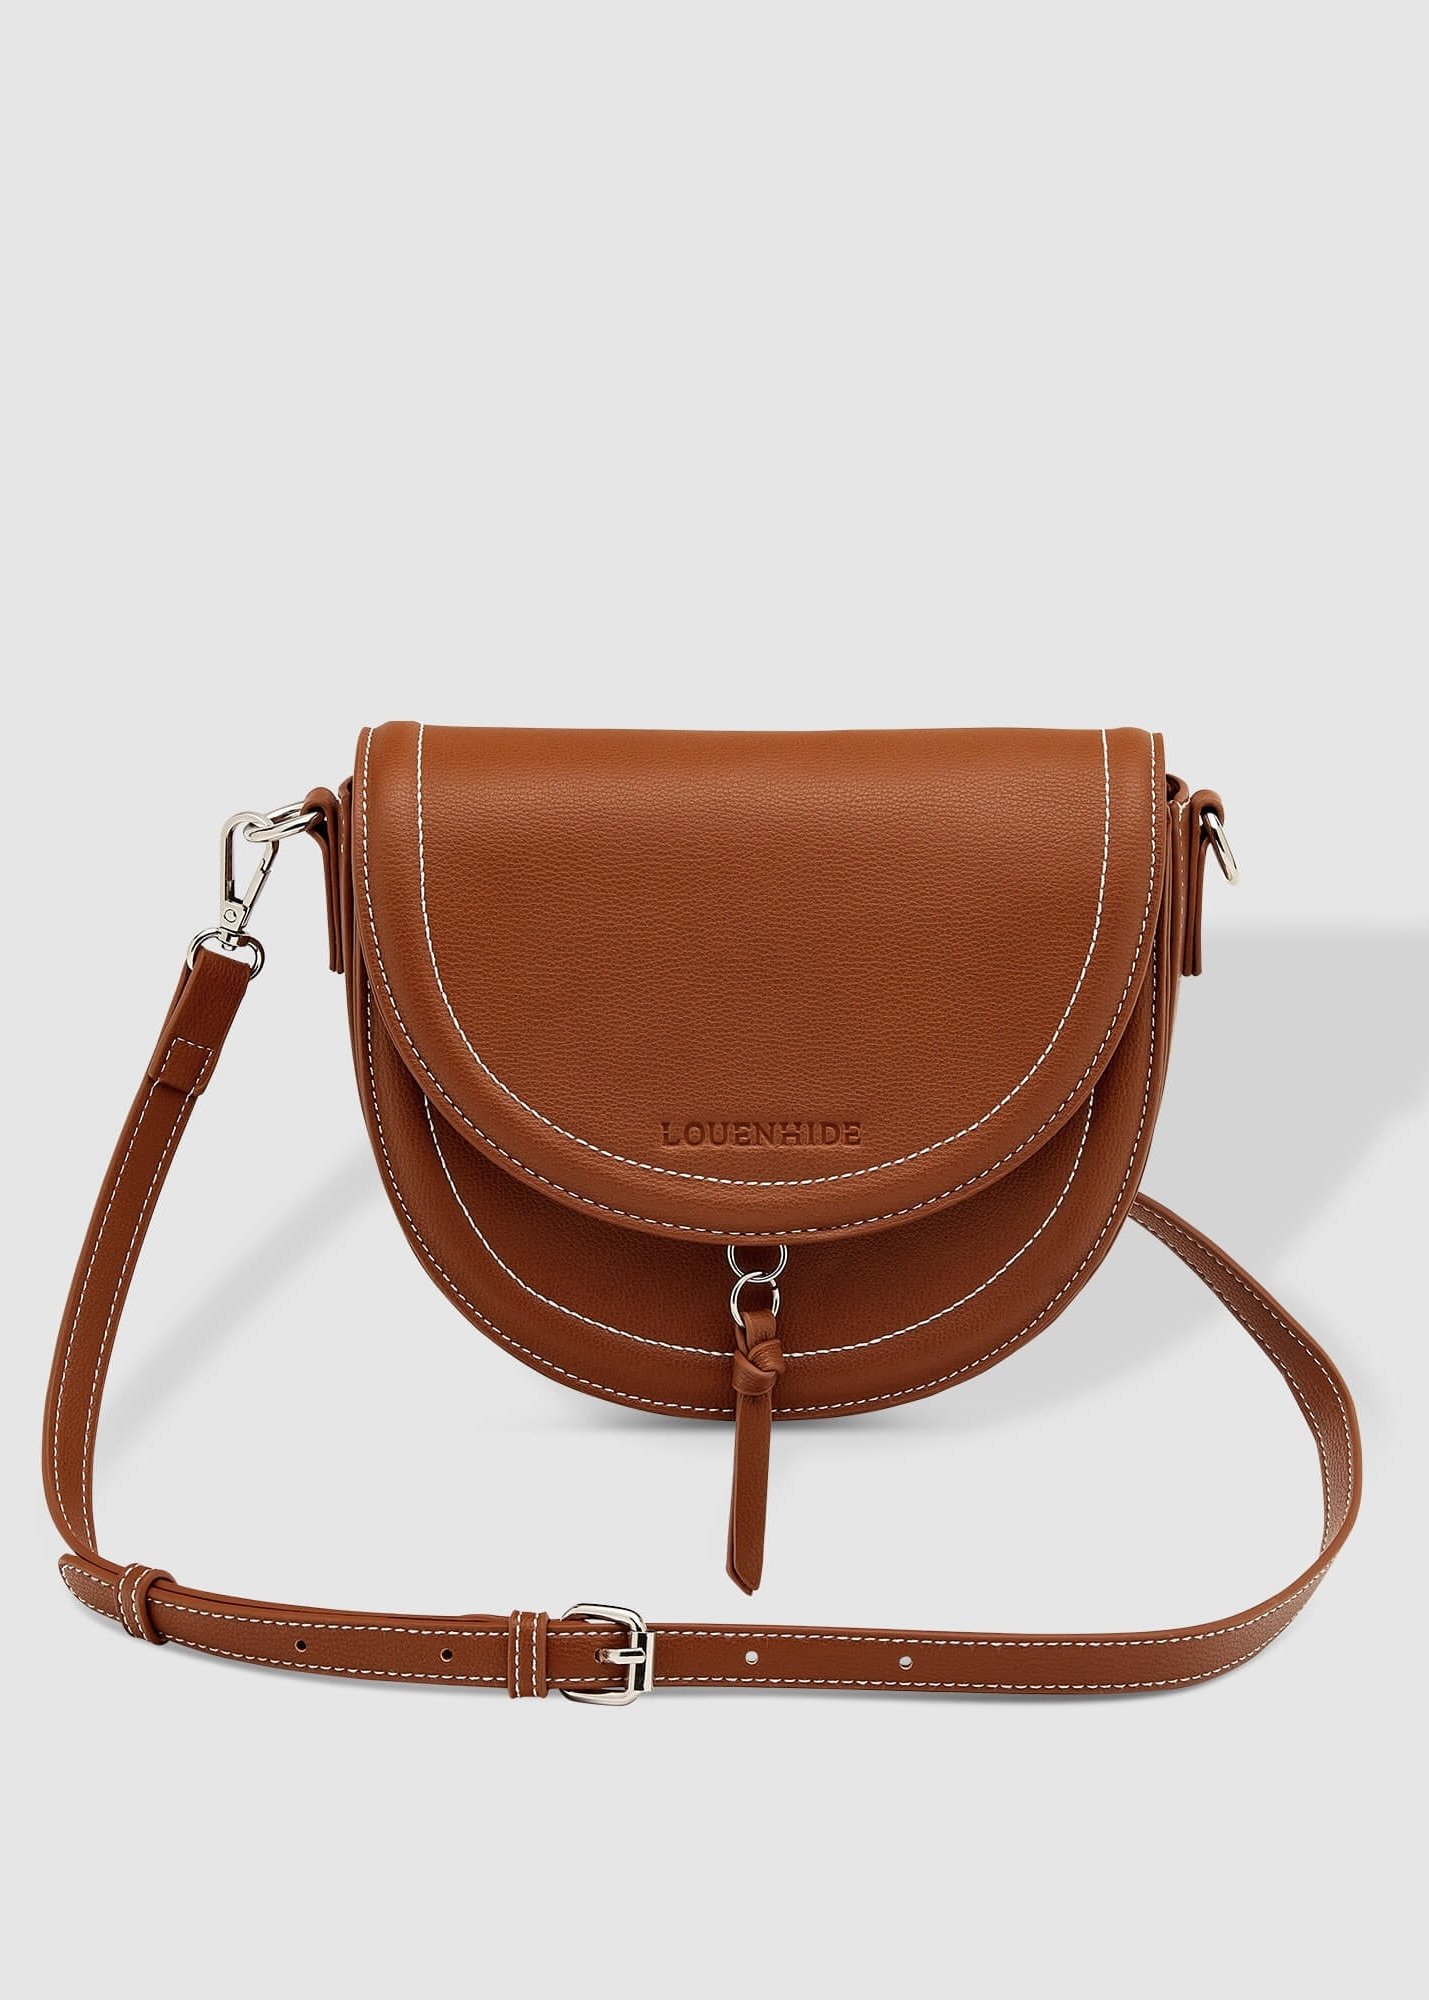 TULLY Crossbody Bag - Lady Slipper Intimate Apparel & Accessories